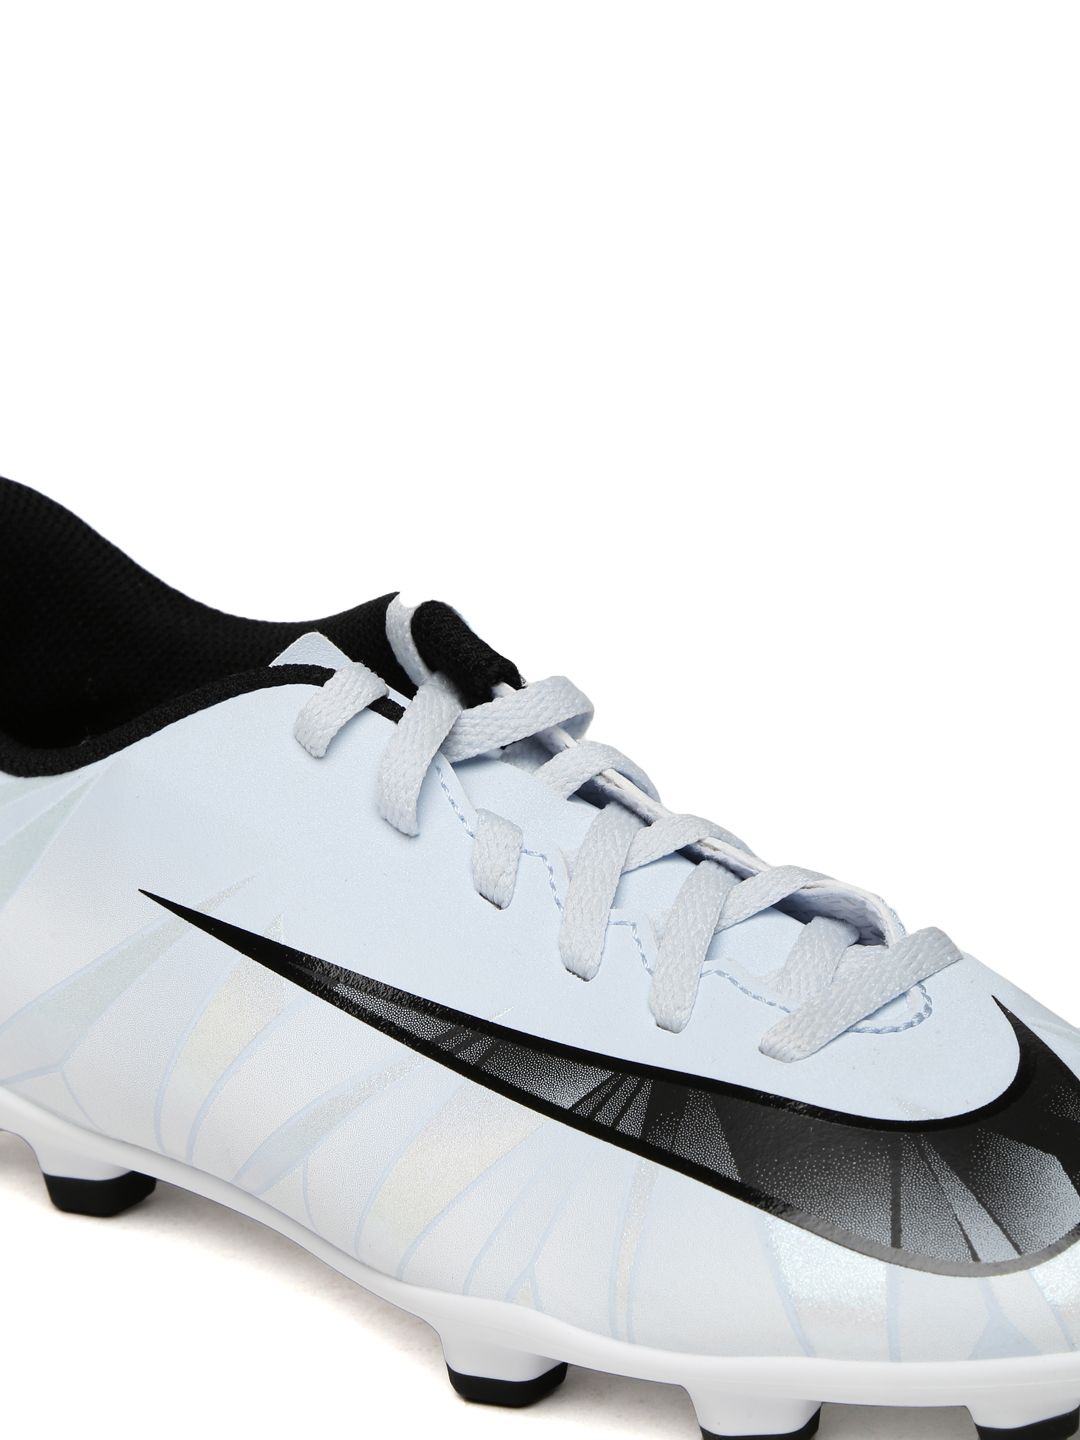 Youth Cr7 Soccer Shoes Canada DHgate